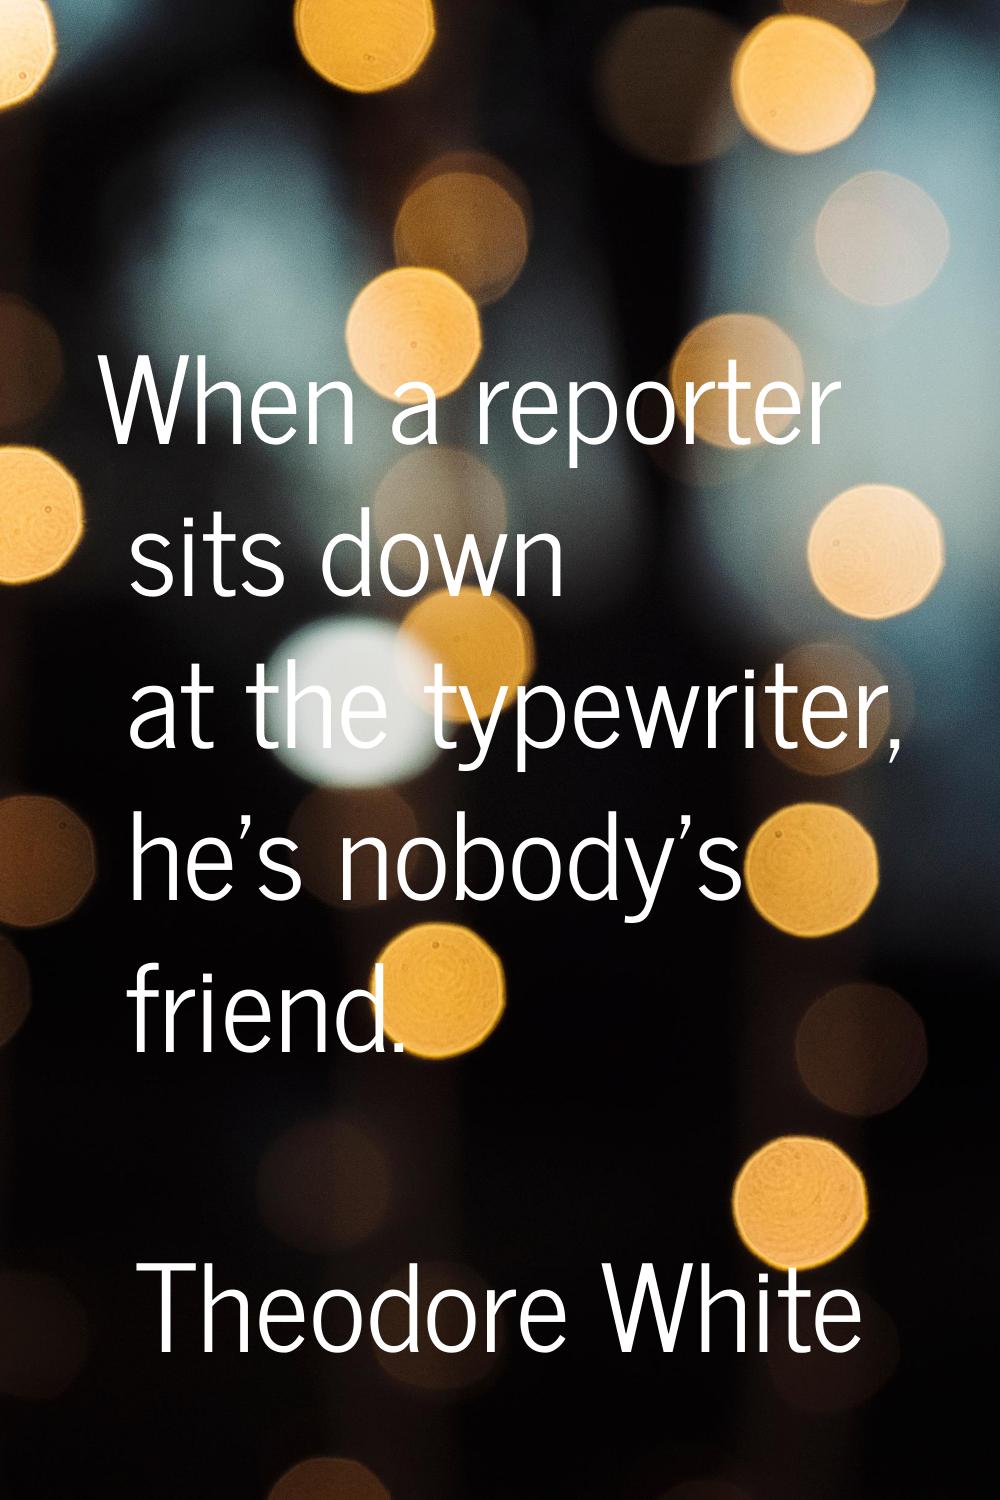 When a reporter sits down at the typewriter, he's nobody's friend.